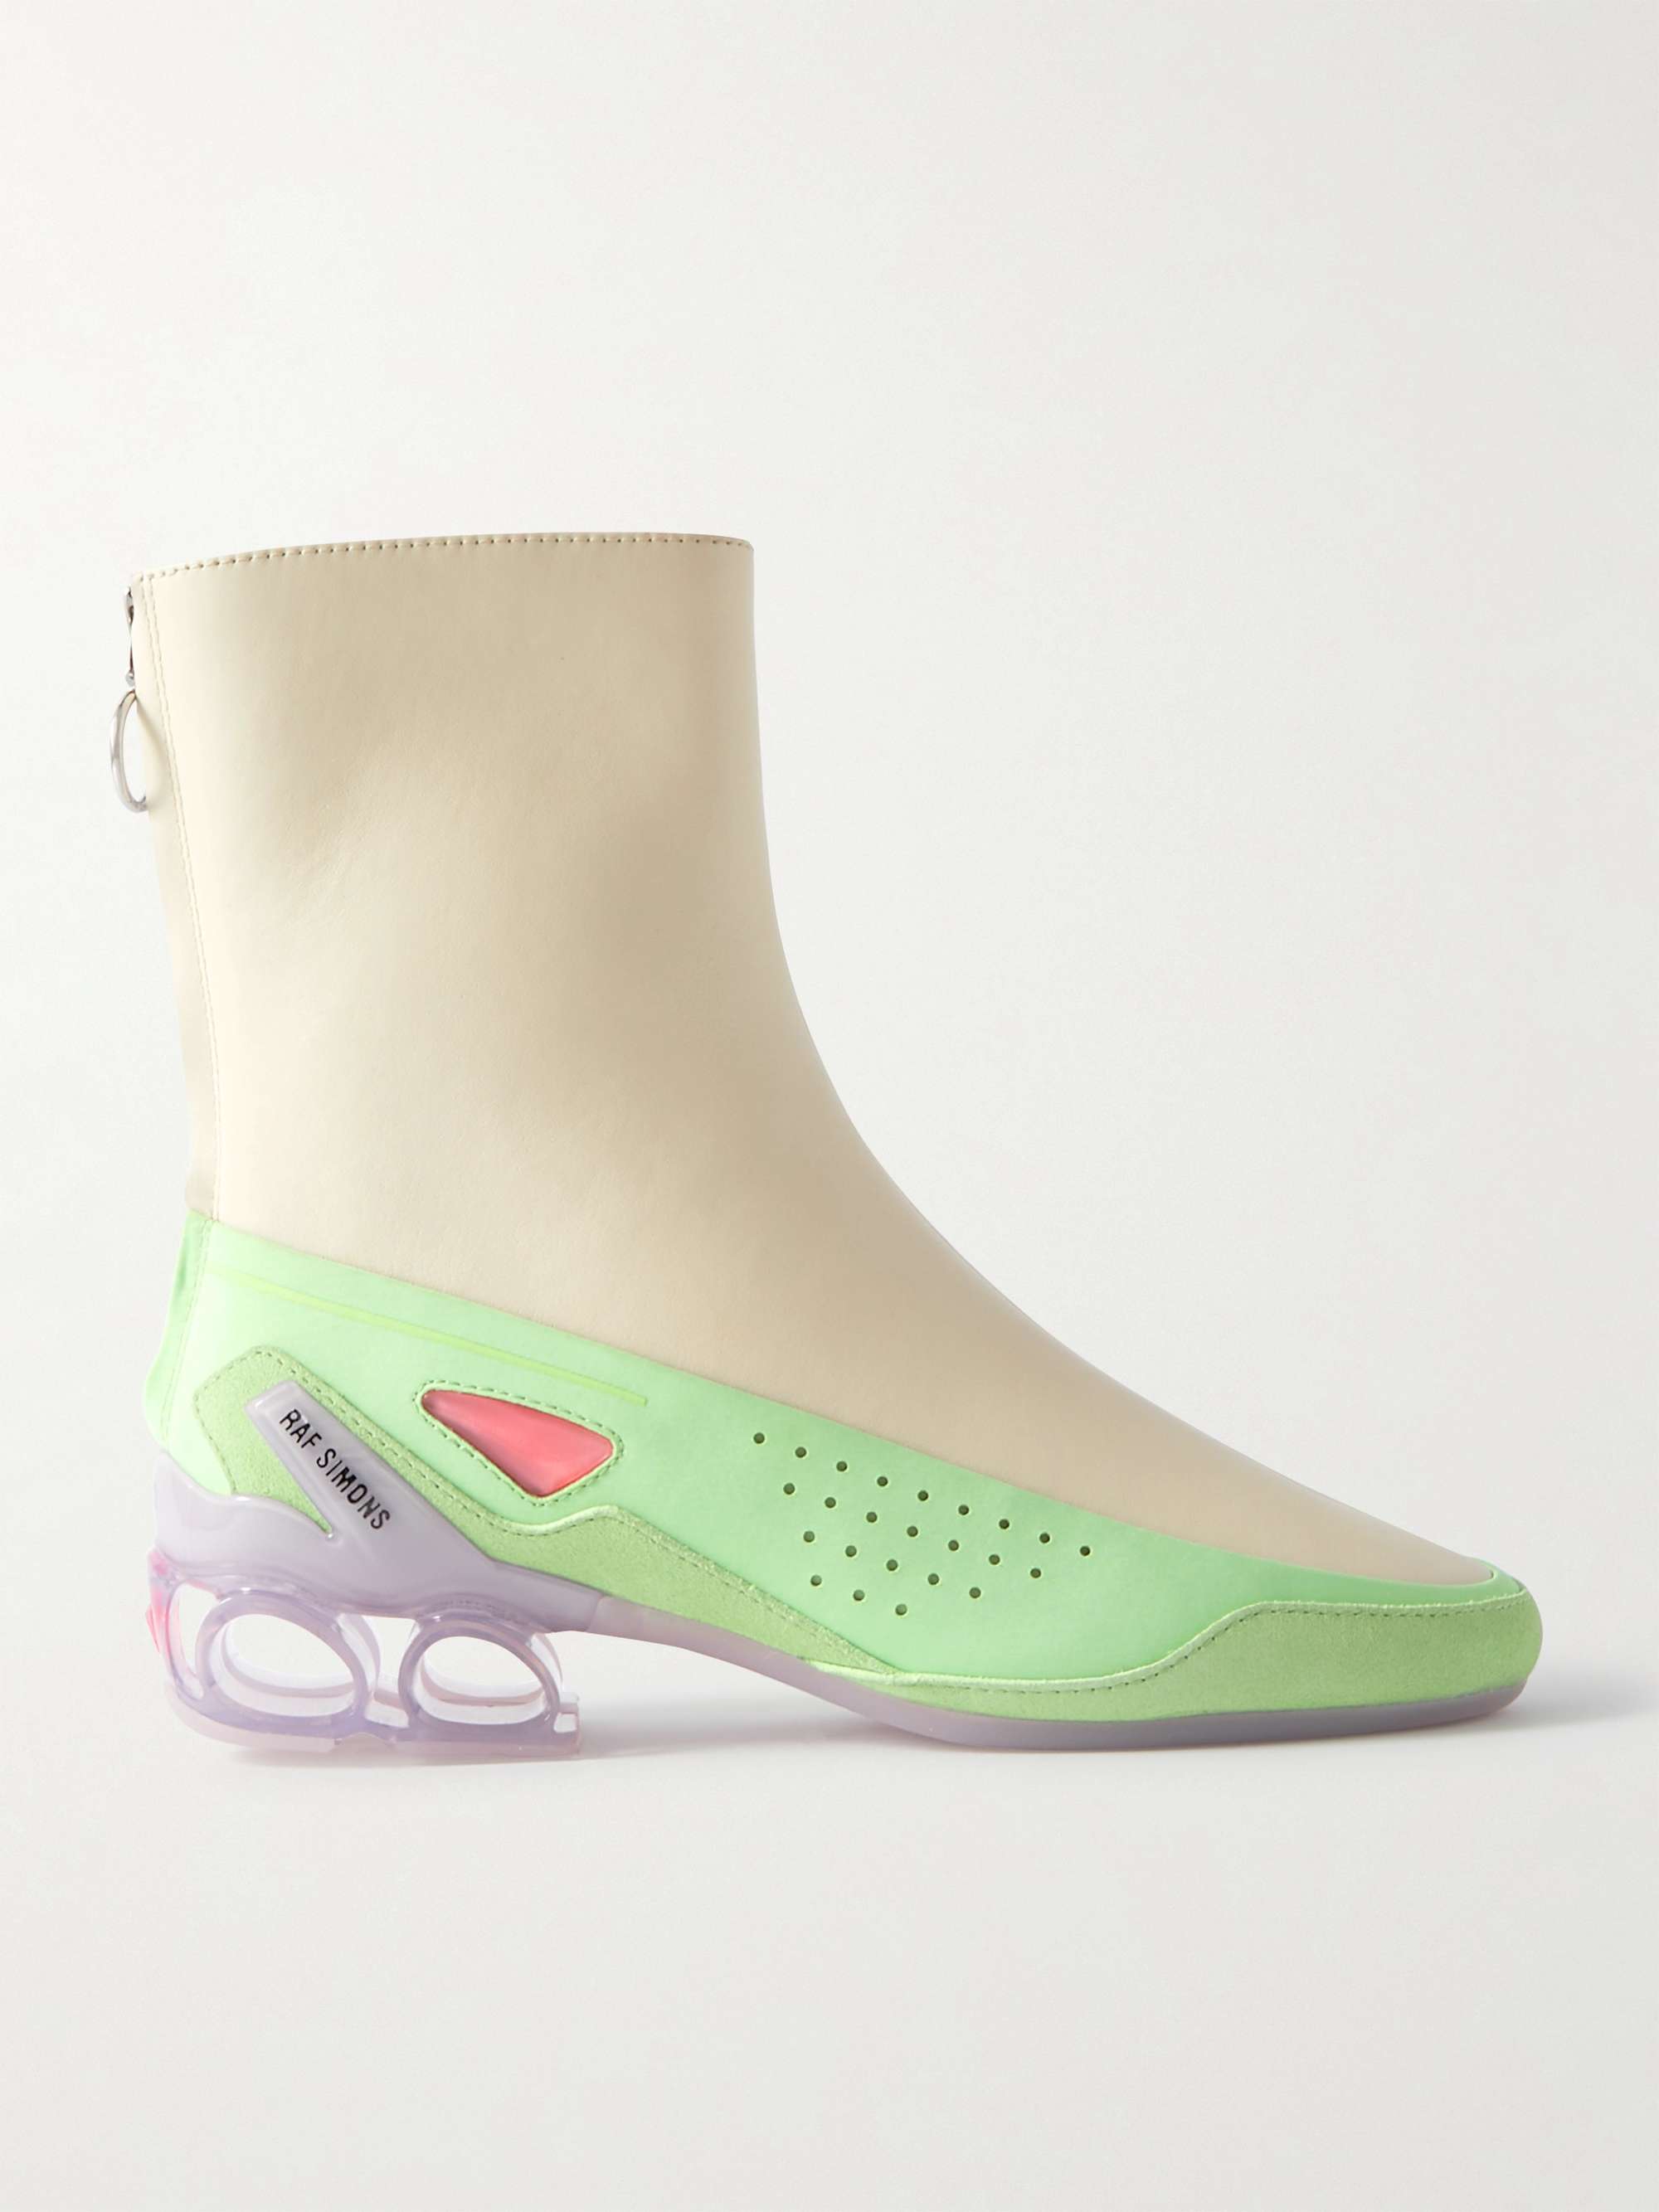 RAF SIMONS Cycloid-4 Nylon and Suede-Trimmed Leather Ankle Boots